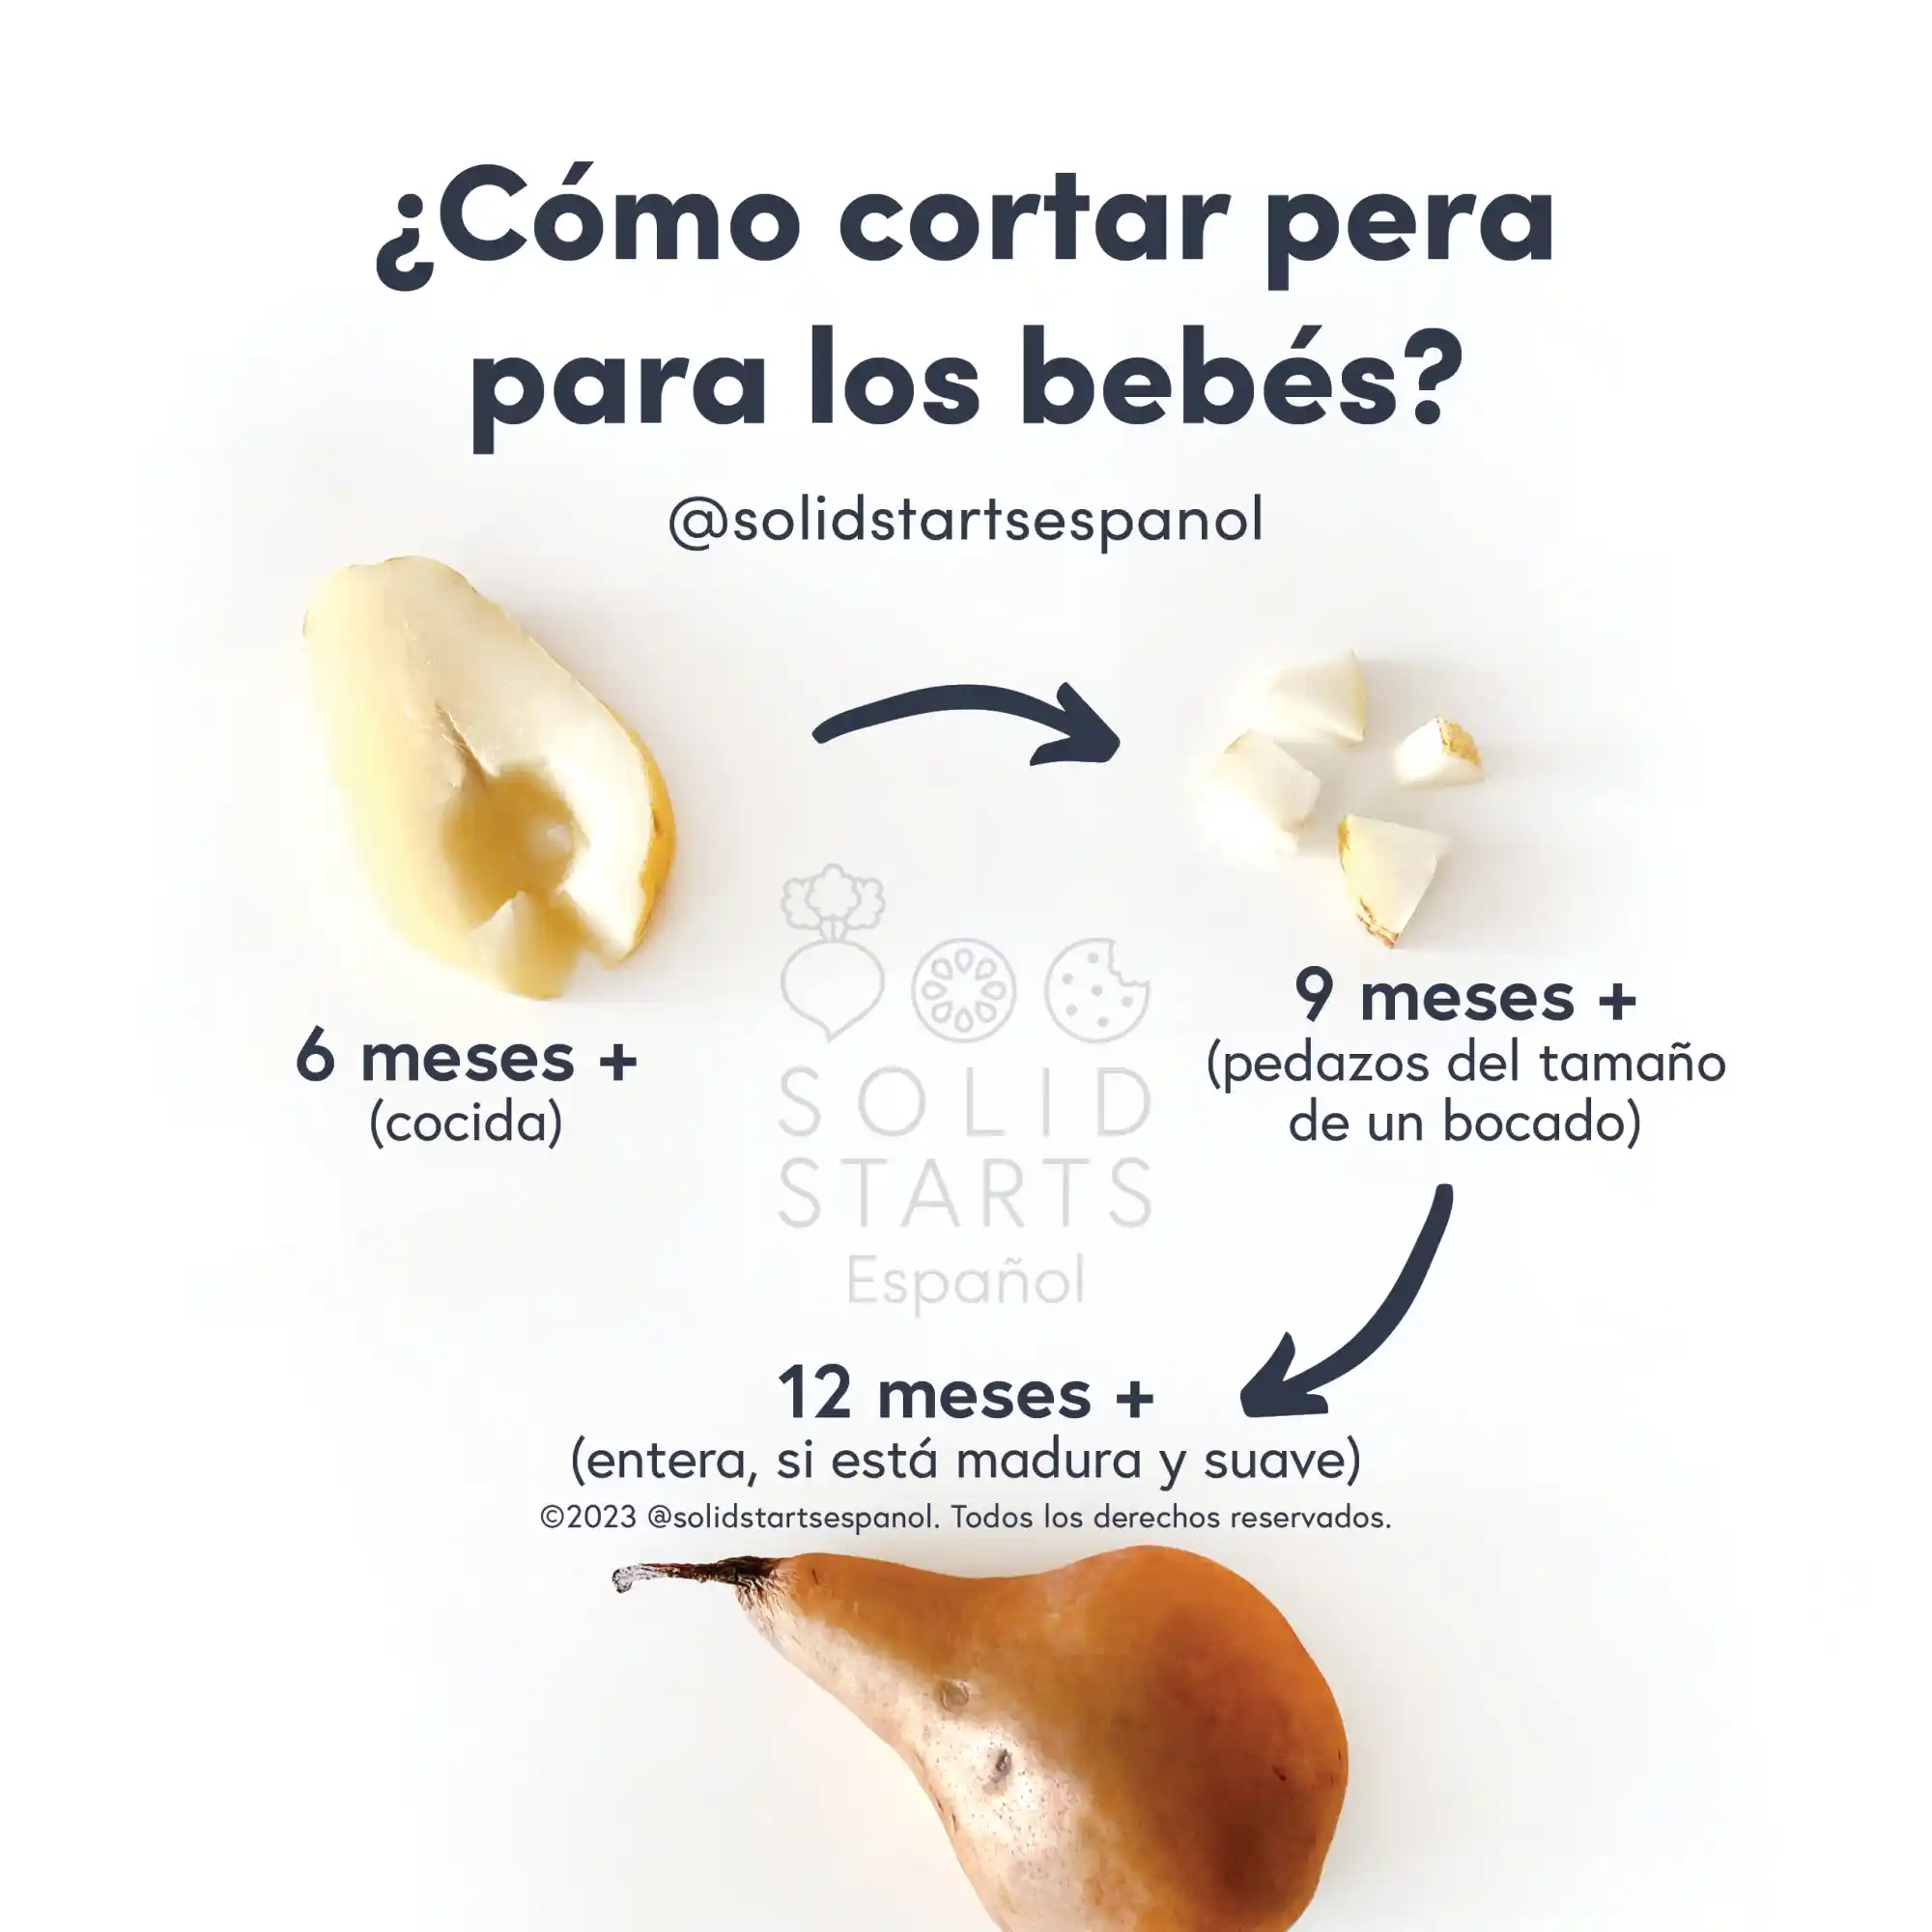 an infographic with the header "how to cut pear for babies": a cooked pear cut in half for 6 months+, bite-sized pieces for babies 9 months+, and a whole, ripe, soft pear for toddlers 12 months